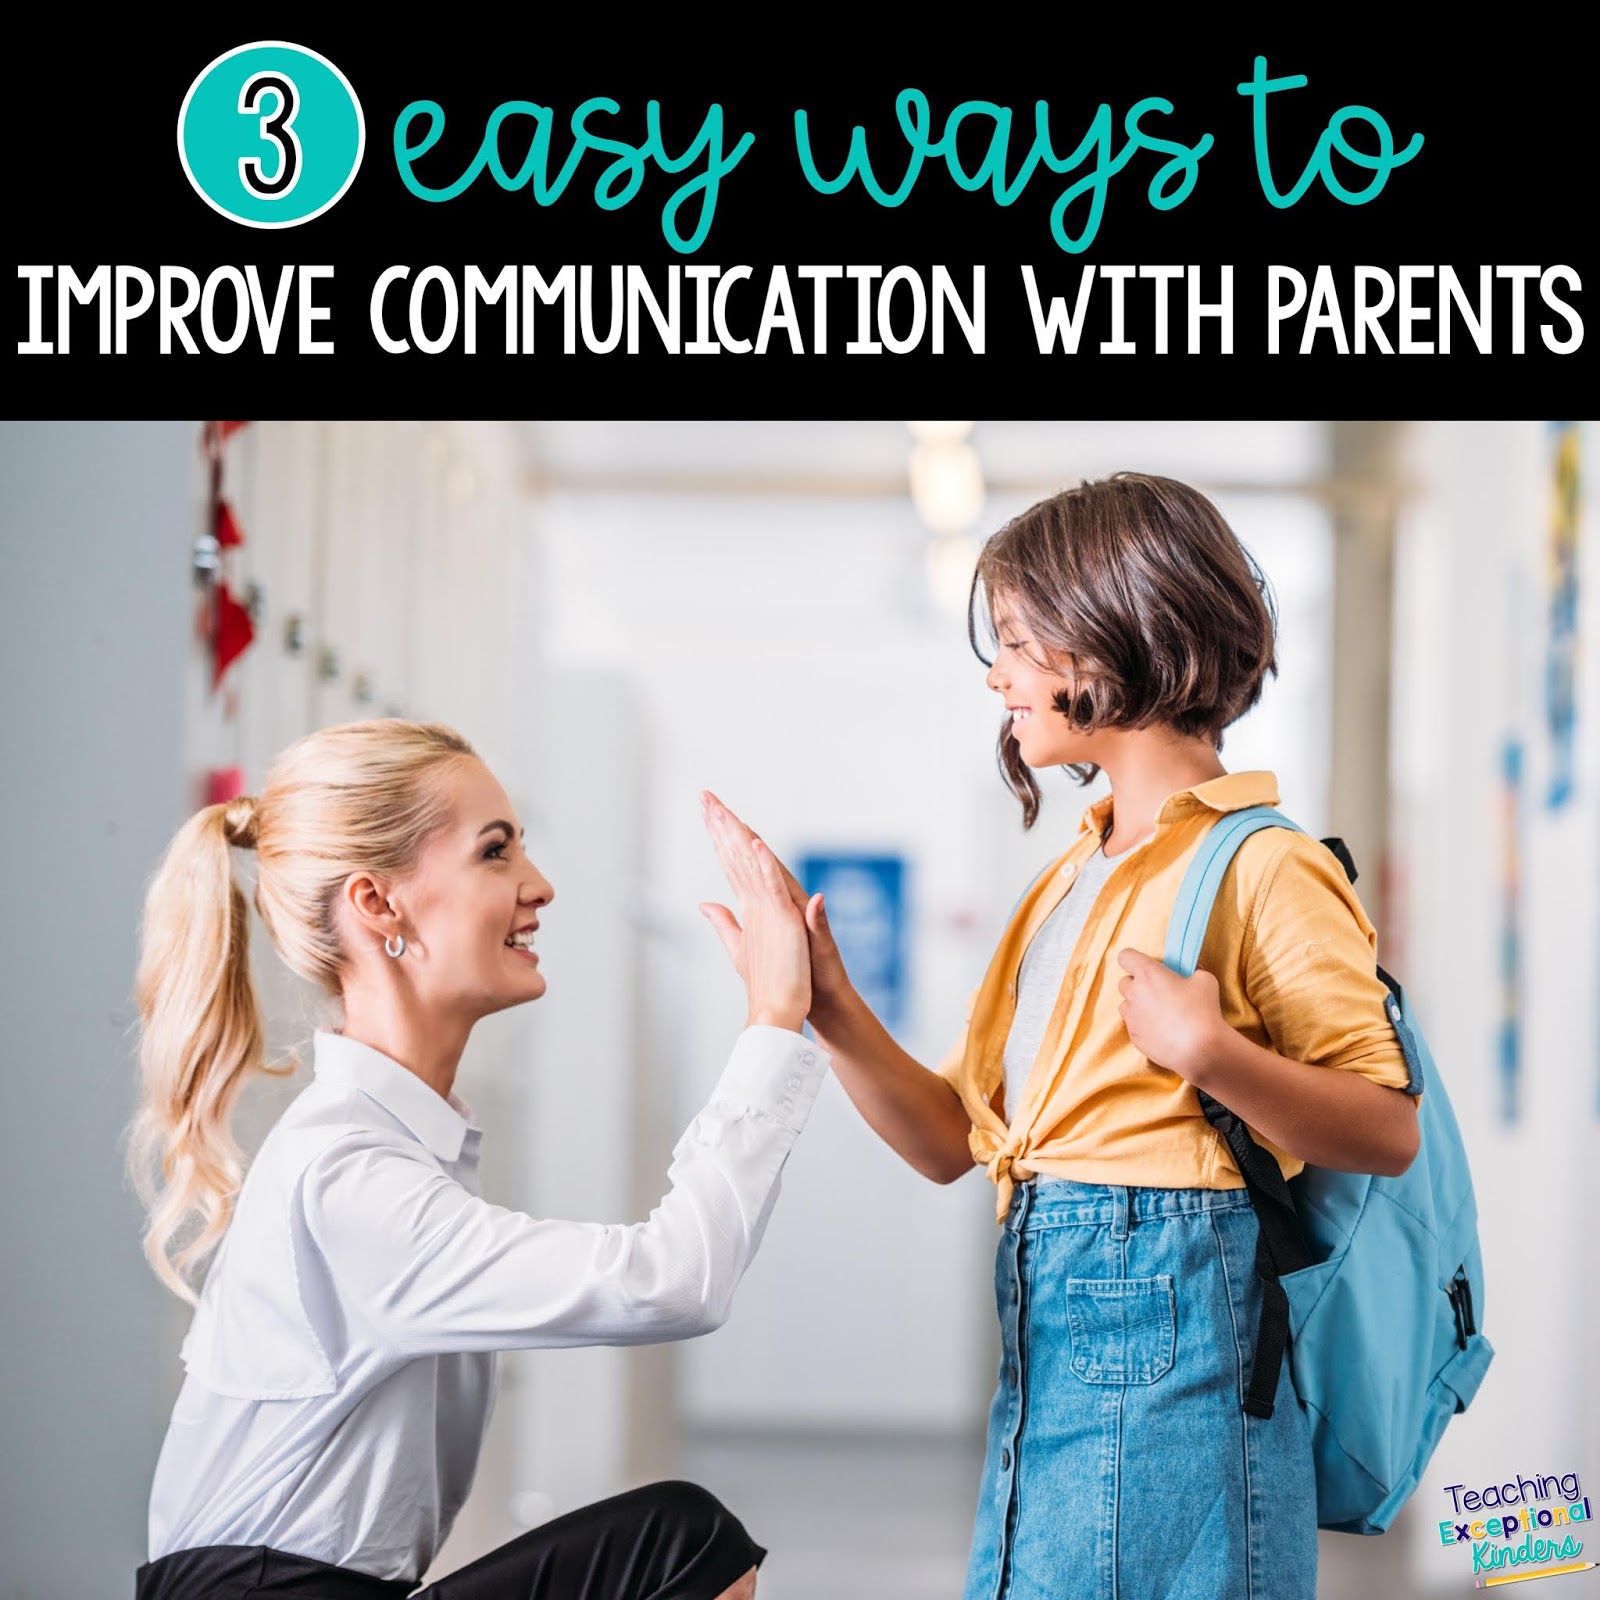 3 Simple Ways to Improve Communication with Parents